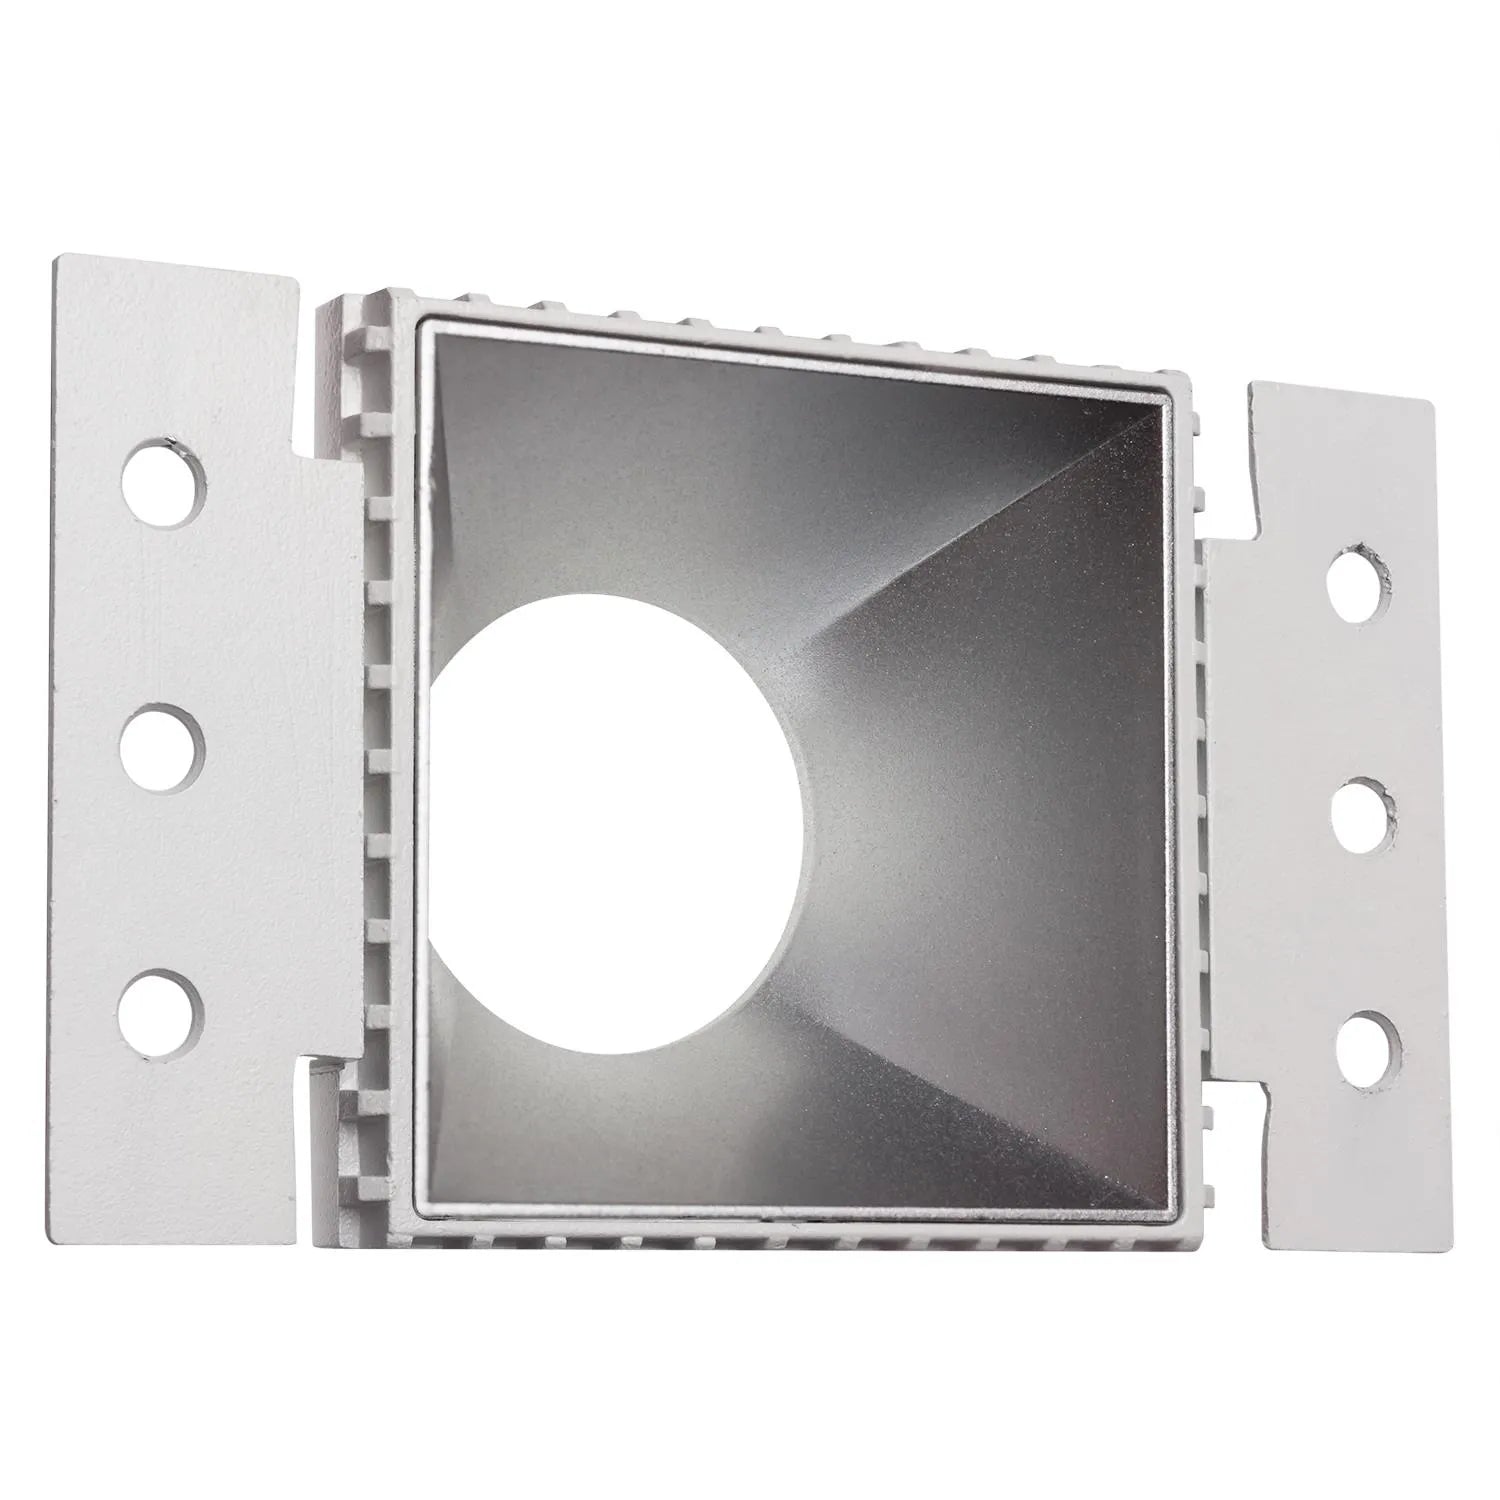 Westgate LRD-TL-10W-35K-4S-HZ LED 4" Round Architectural Trimless Recessed Light Residential Lighting - Matte Silver